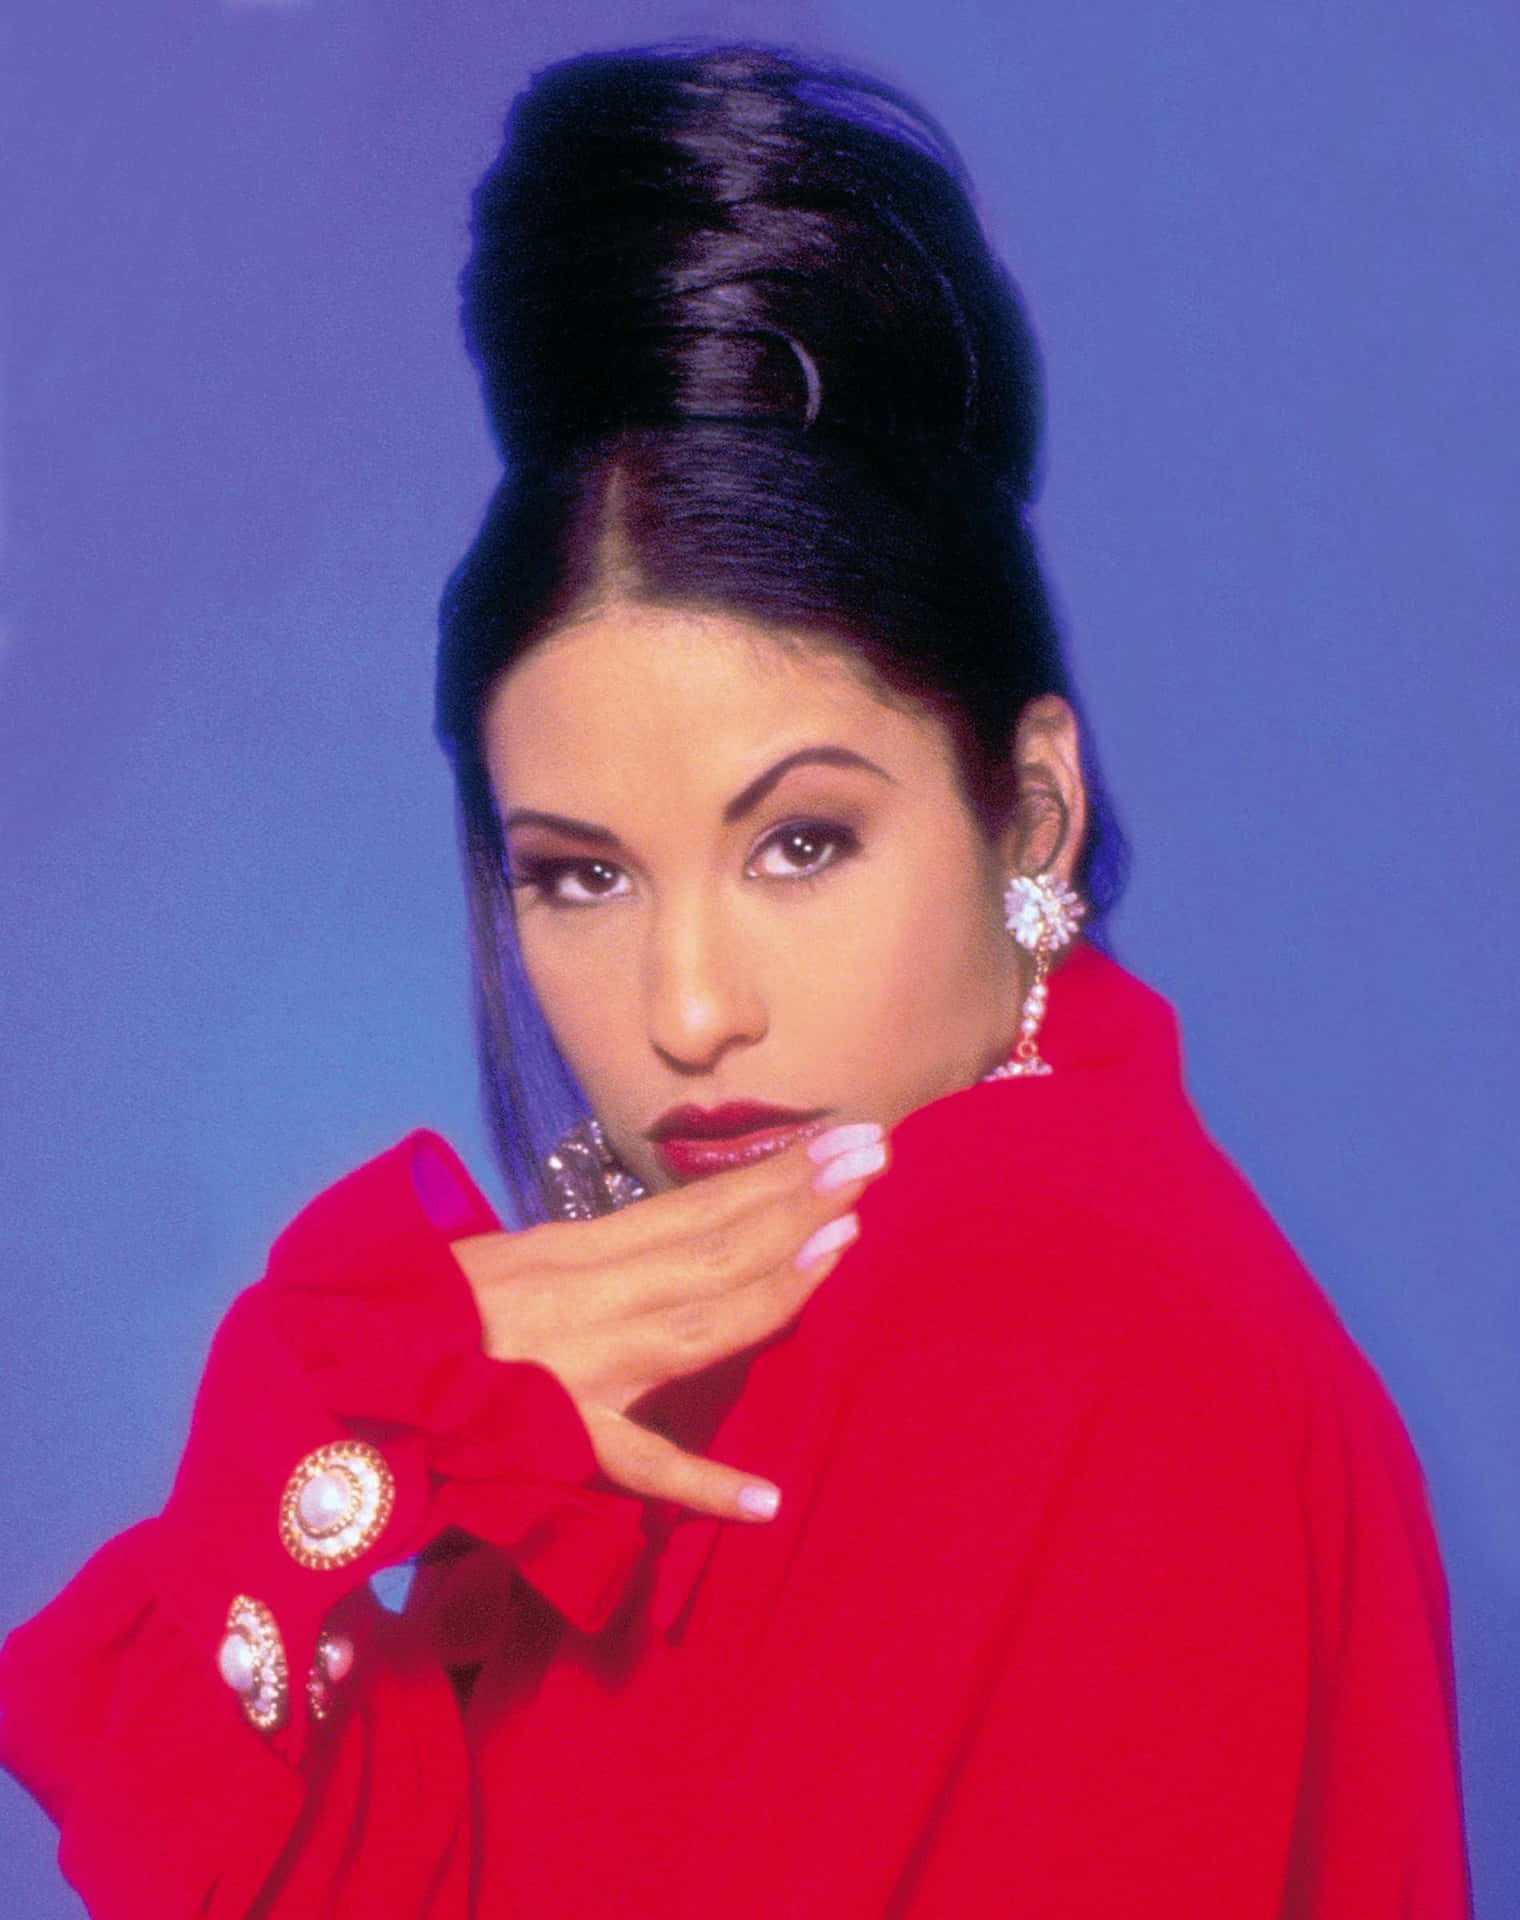 Show your love for the Queen of Tejano, Selena Quintanilla, with her iconic image on your iPhone Wallpaper